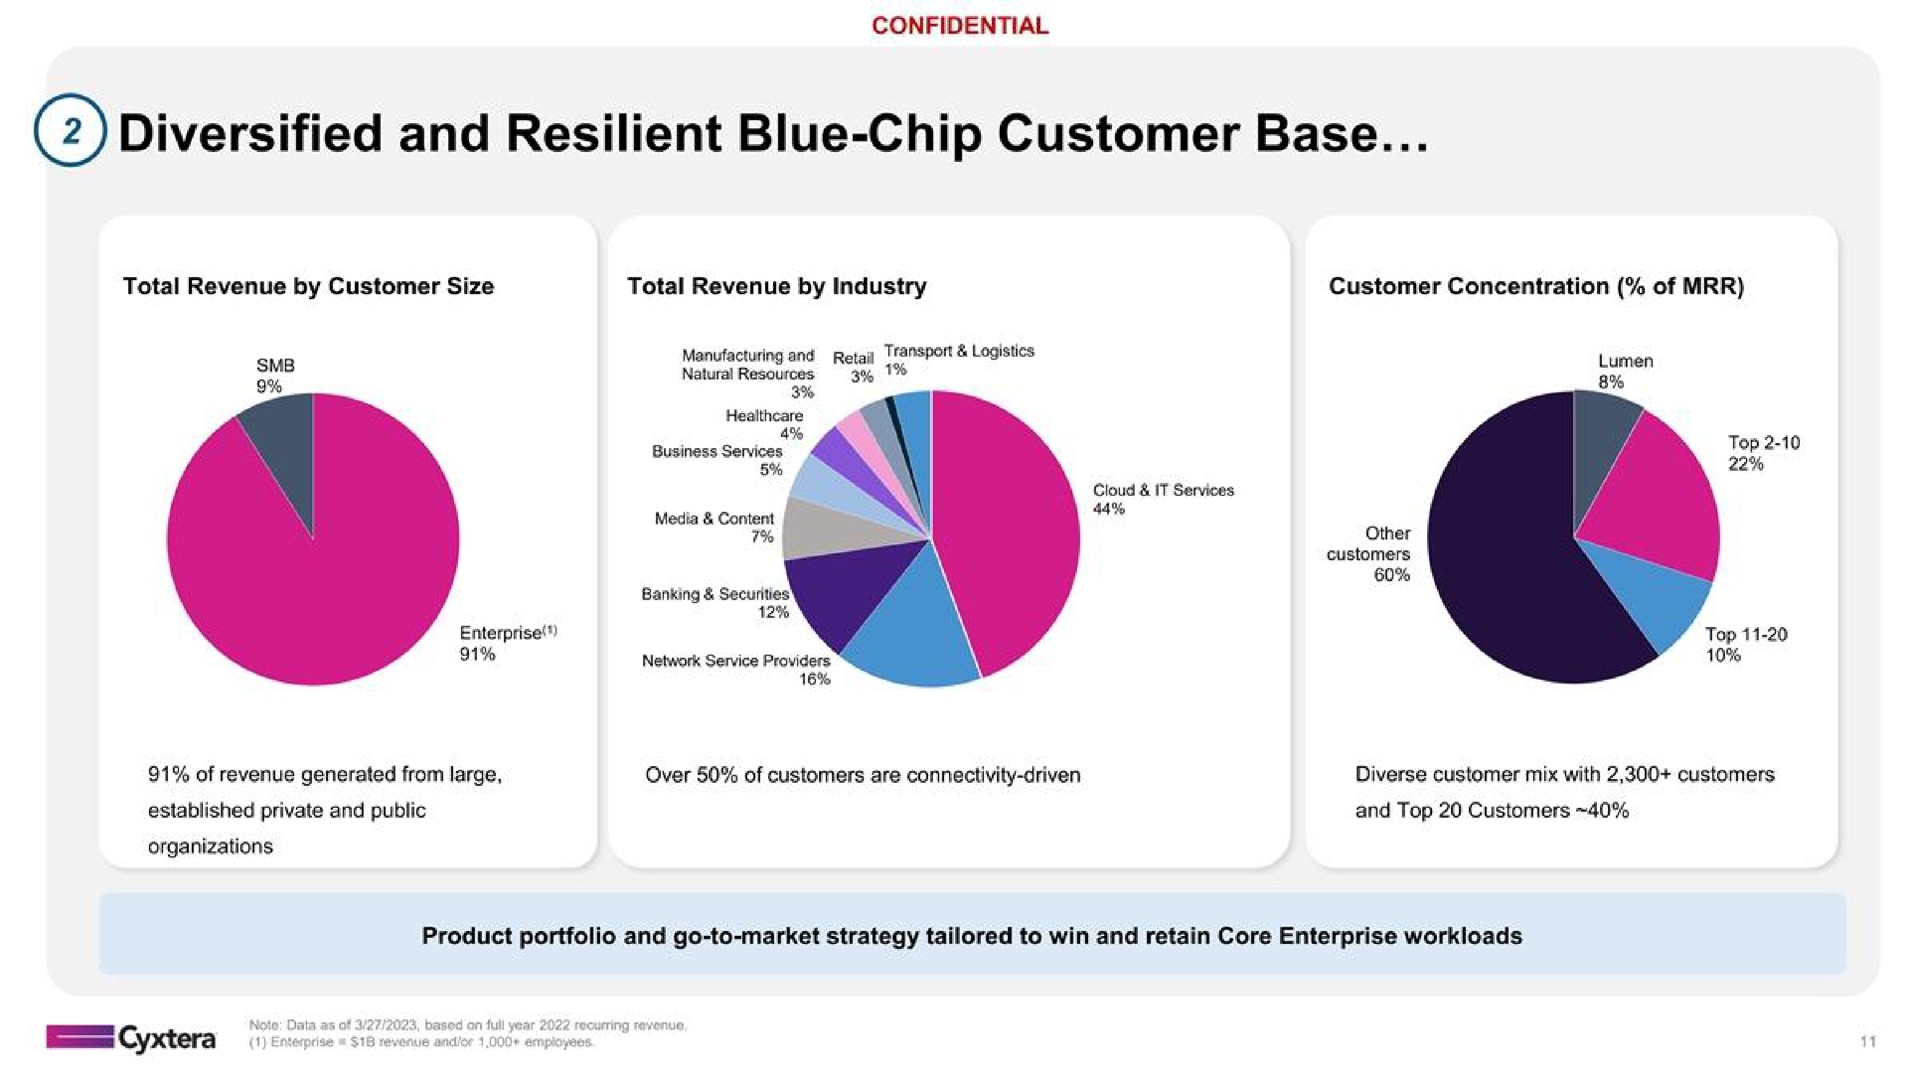 diversified and resilient blue chip customer base | Cyxtera